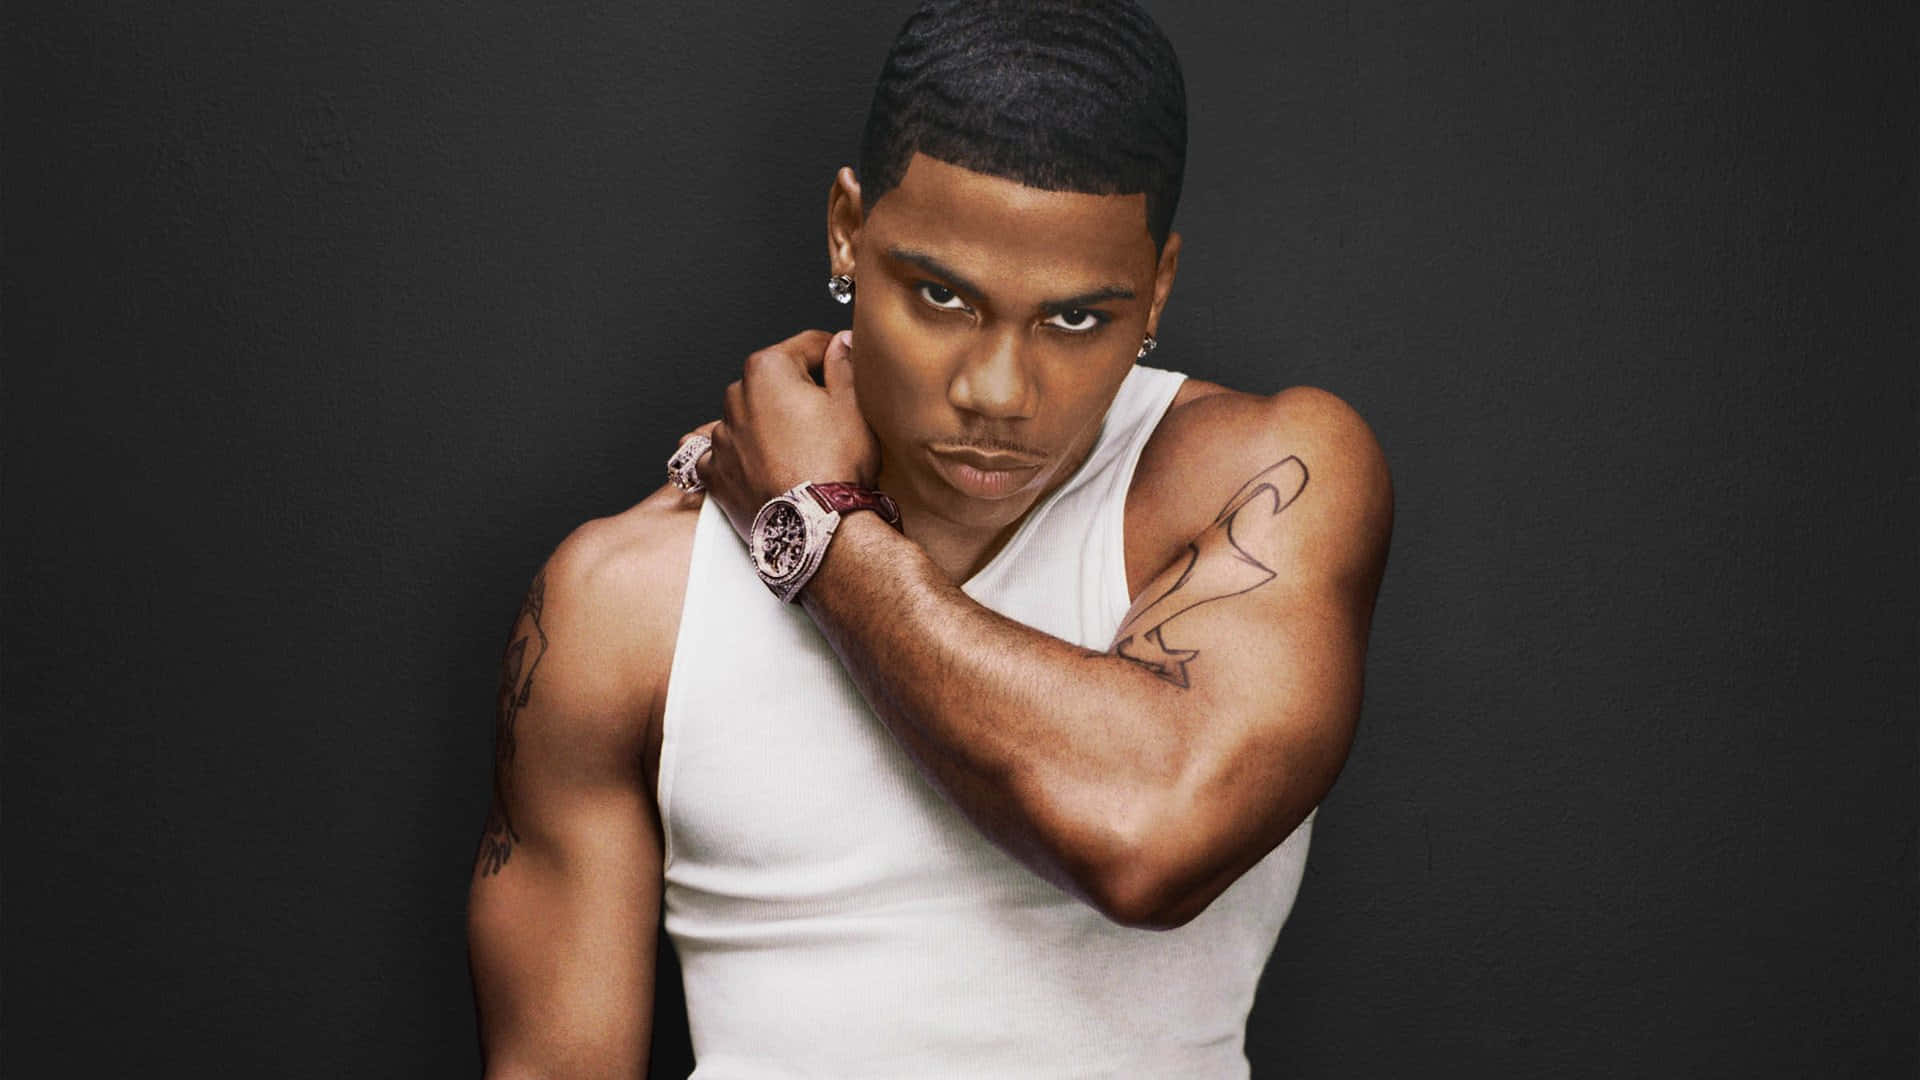 Nelly Showing His Signature "Grillz" Wallpaper